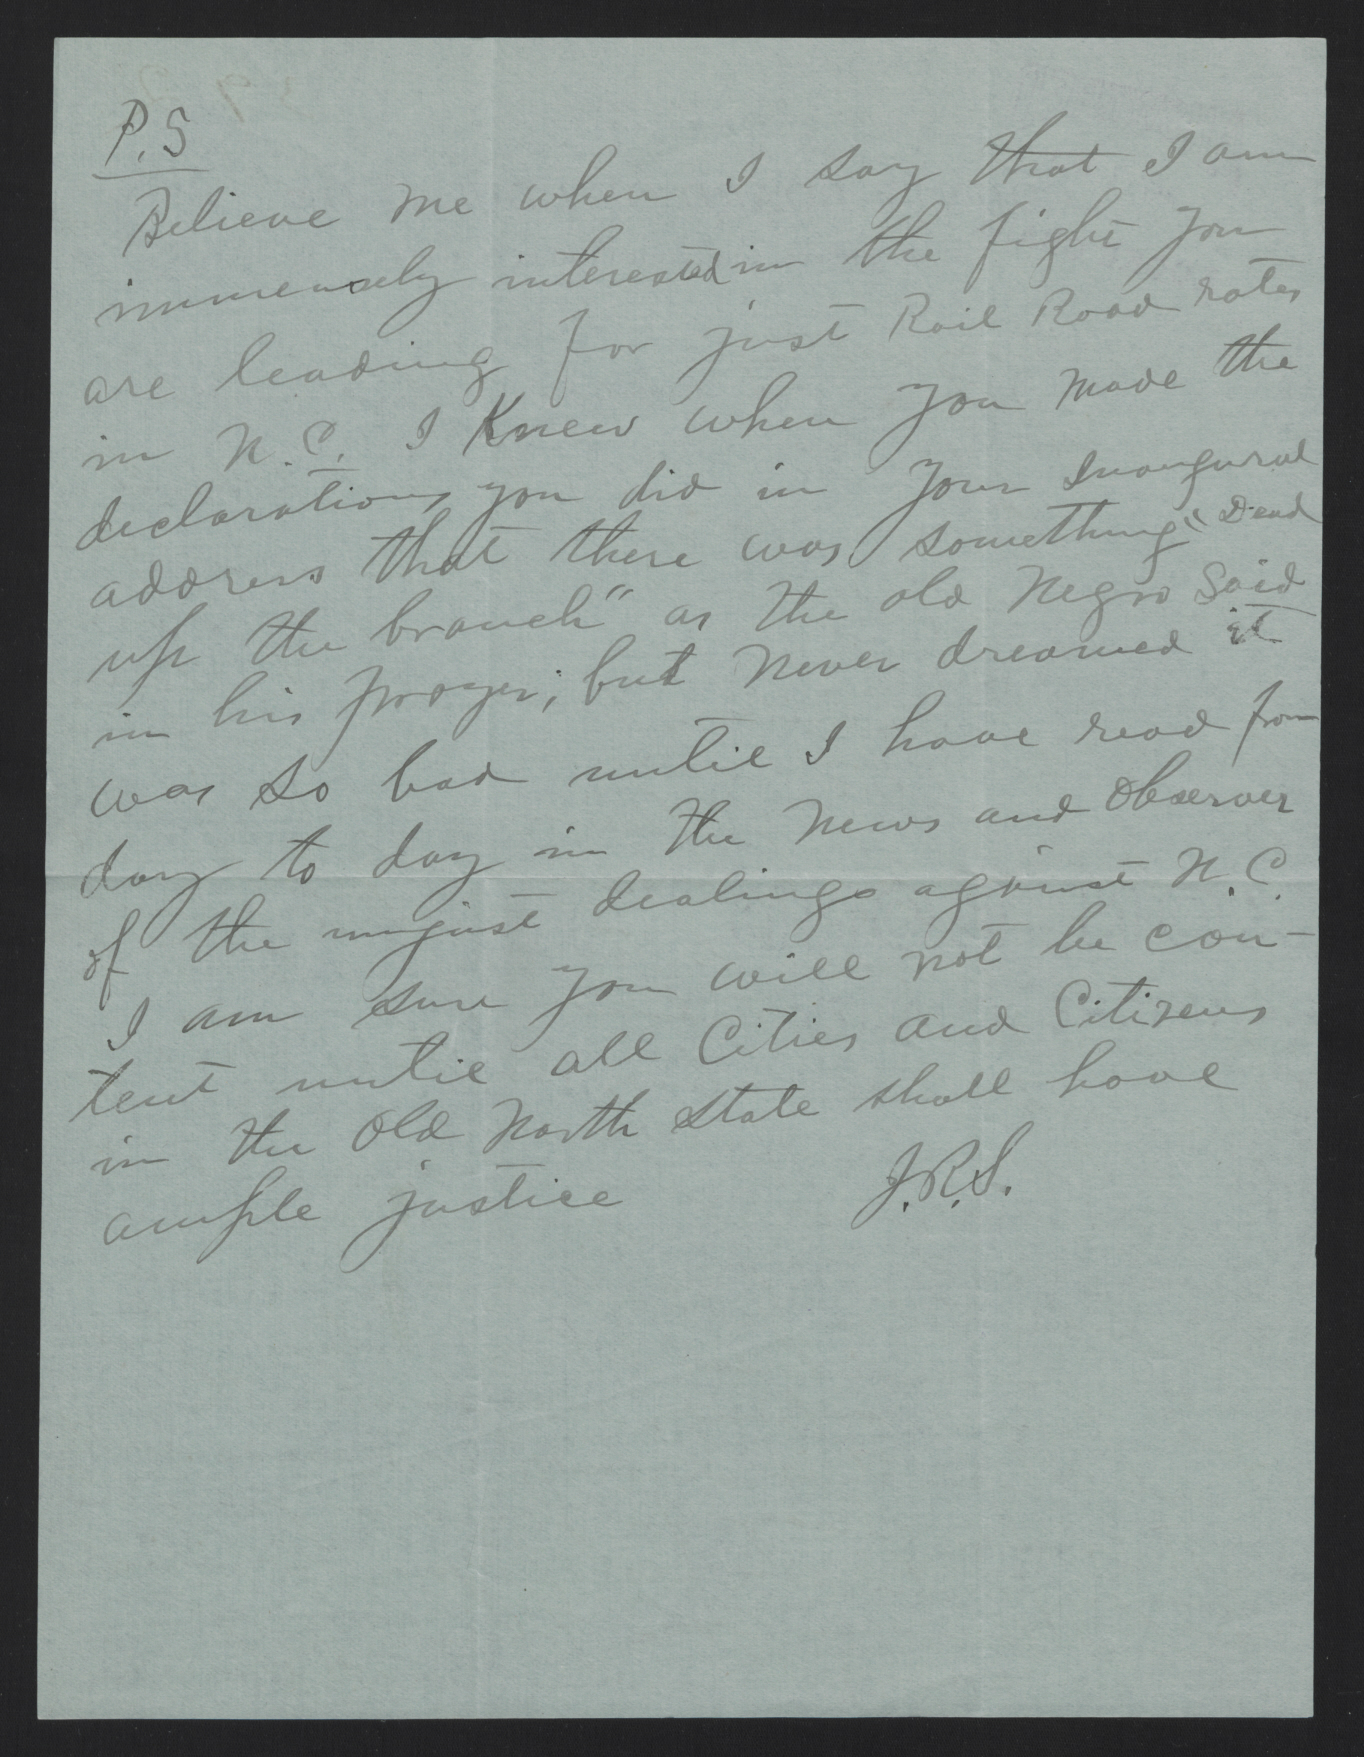 Letter from Sams to Craig, August 27, 1913, page 2